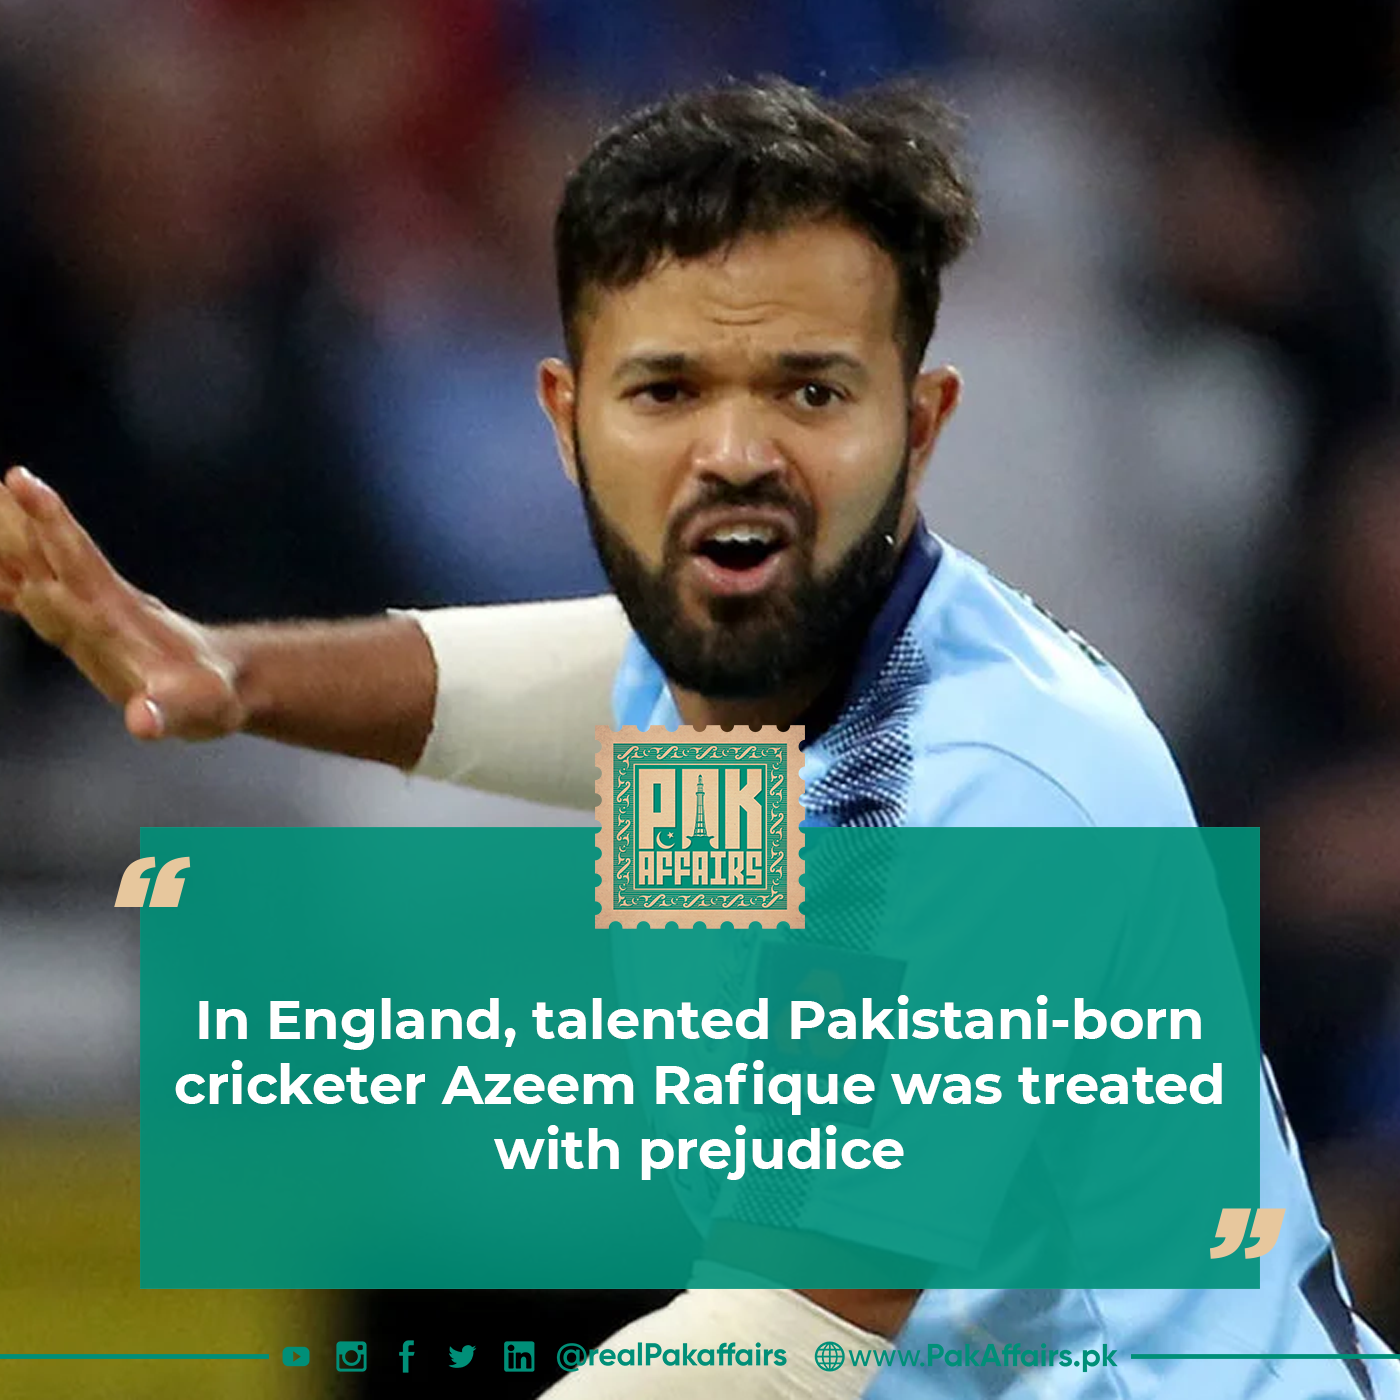 In England, talented Pakistani-born cricketer Azeem Rafique was treated with prejudice